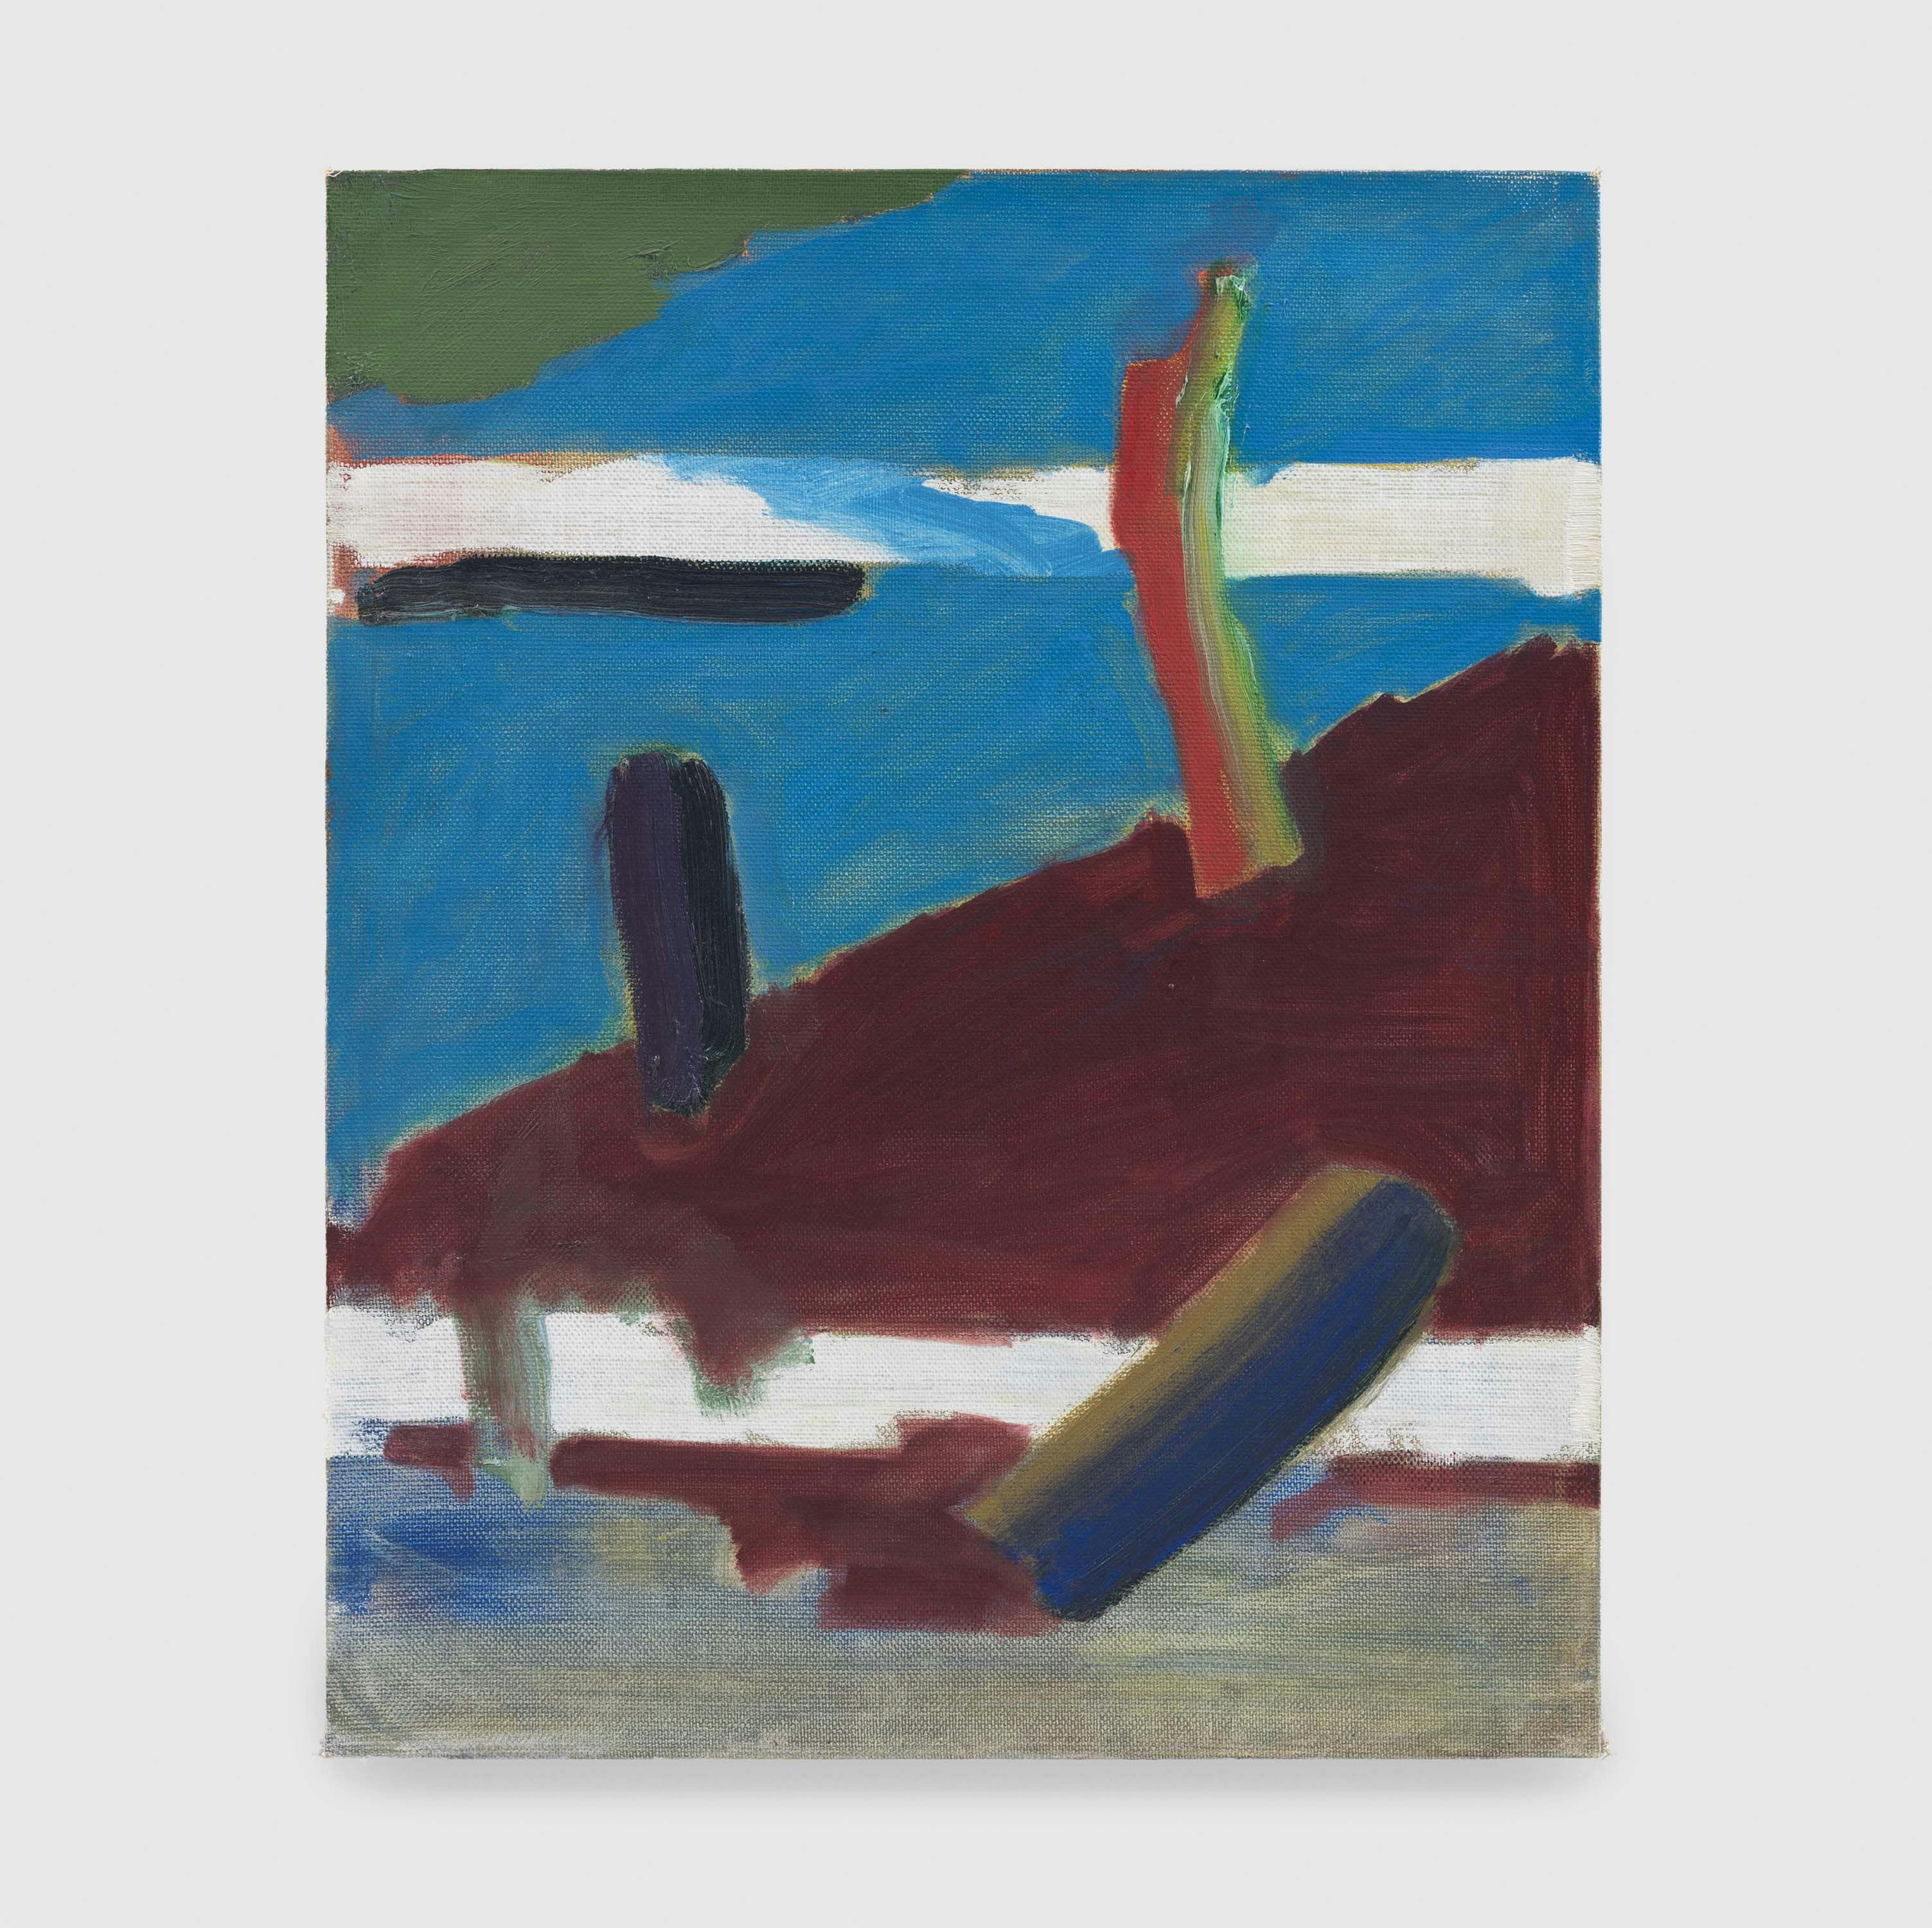 A painting by Raoul De Keyser, titled Hellepoort 8 (Gates of Hell 8), dated 1985.